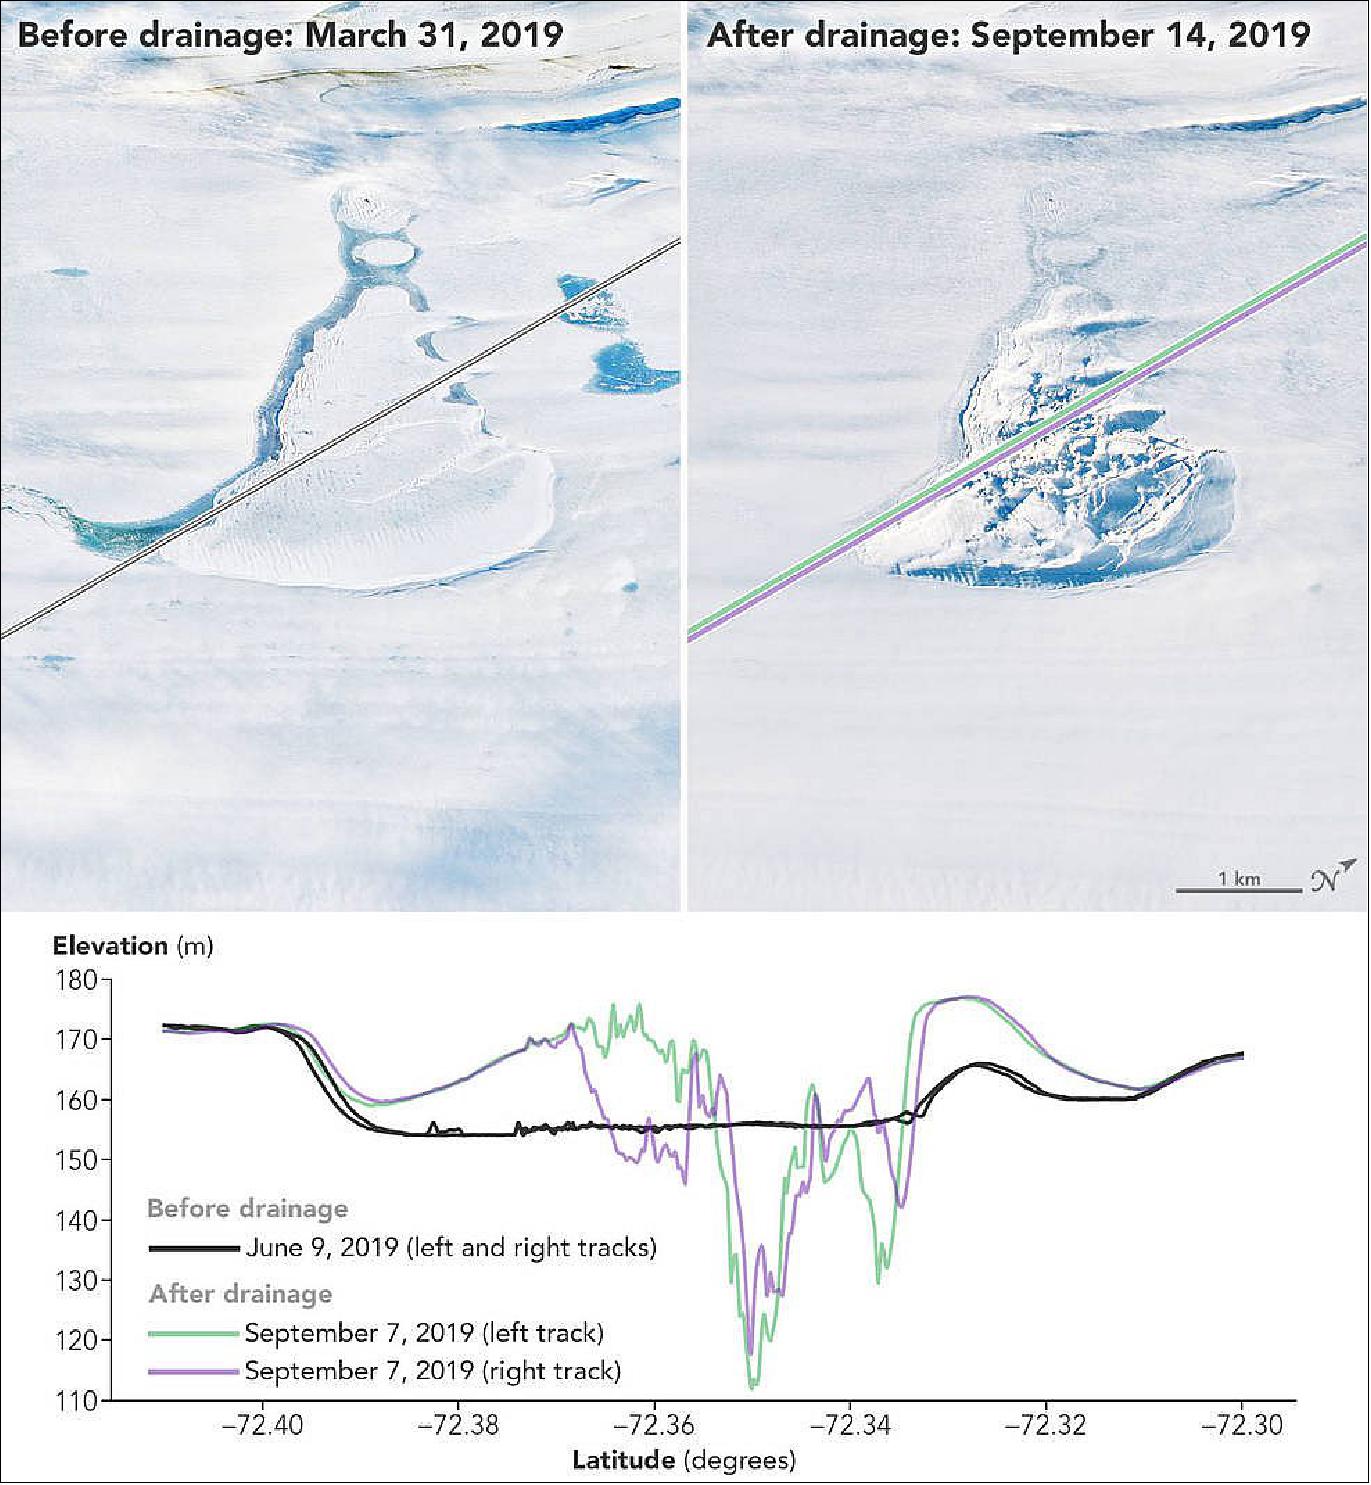 Figure 13: The height profile above was acquired by NASA’s Ice, Cloud, and land Elevation Satellite 2 (ICESat-2) using the Advanced Topographic Laser Altimeter System (ATLAS). The image shows the elevation data acquired by three different ATLAS laser beams as the satellite passed over an ice-covered lake that collapsed suddenly and abruptly on the surface of Antarctica’s Amery Ice Shelf in 2019 (image credit: NASA's Earth Observatory)